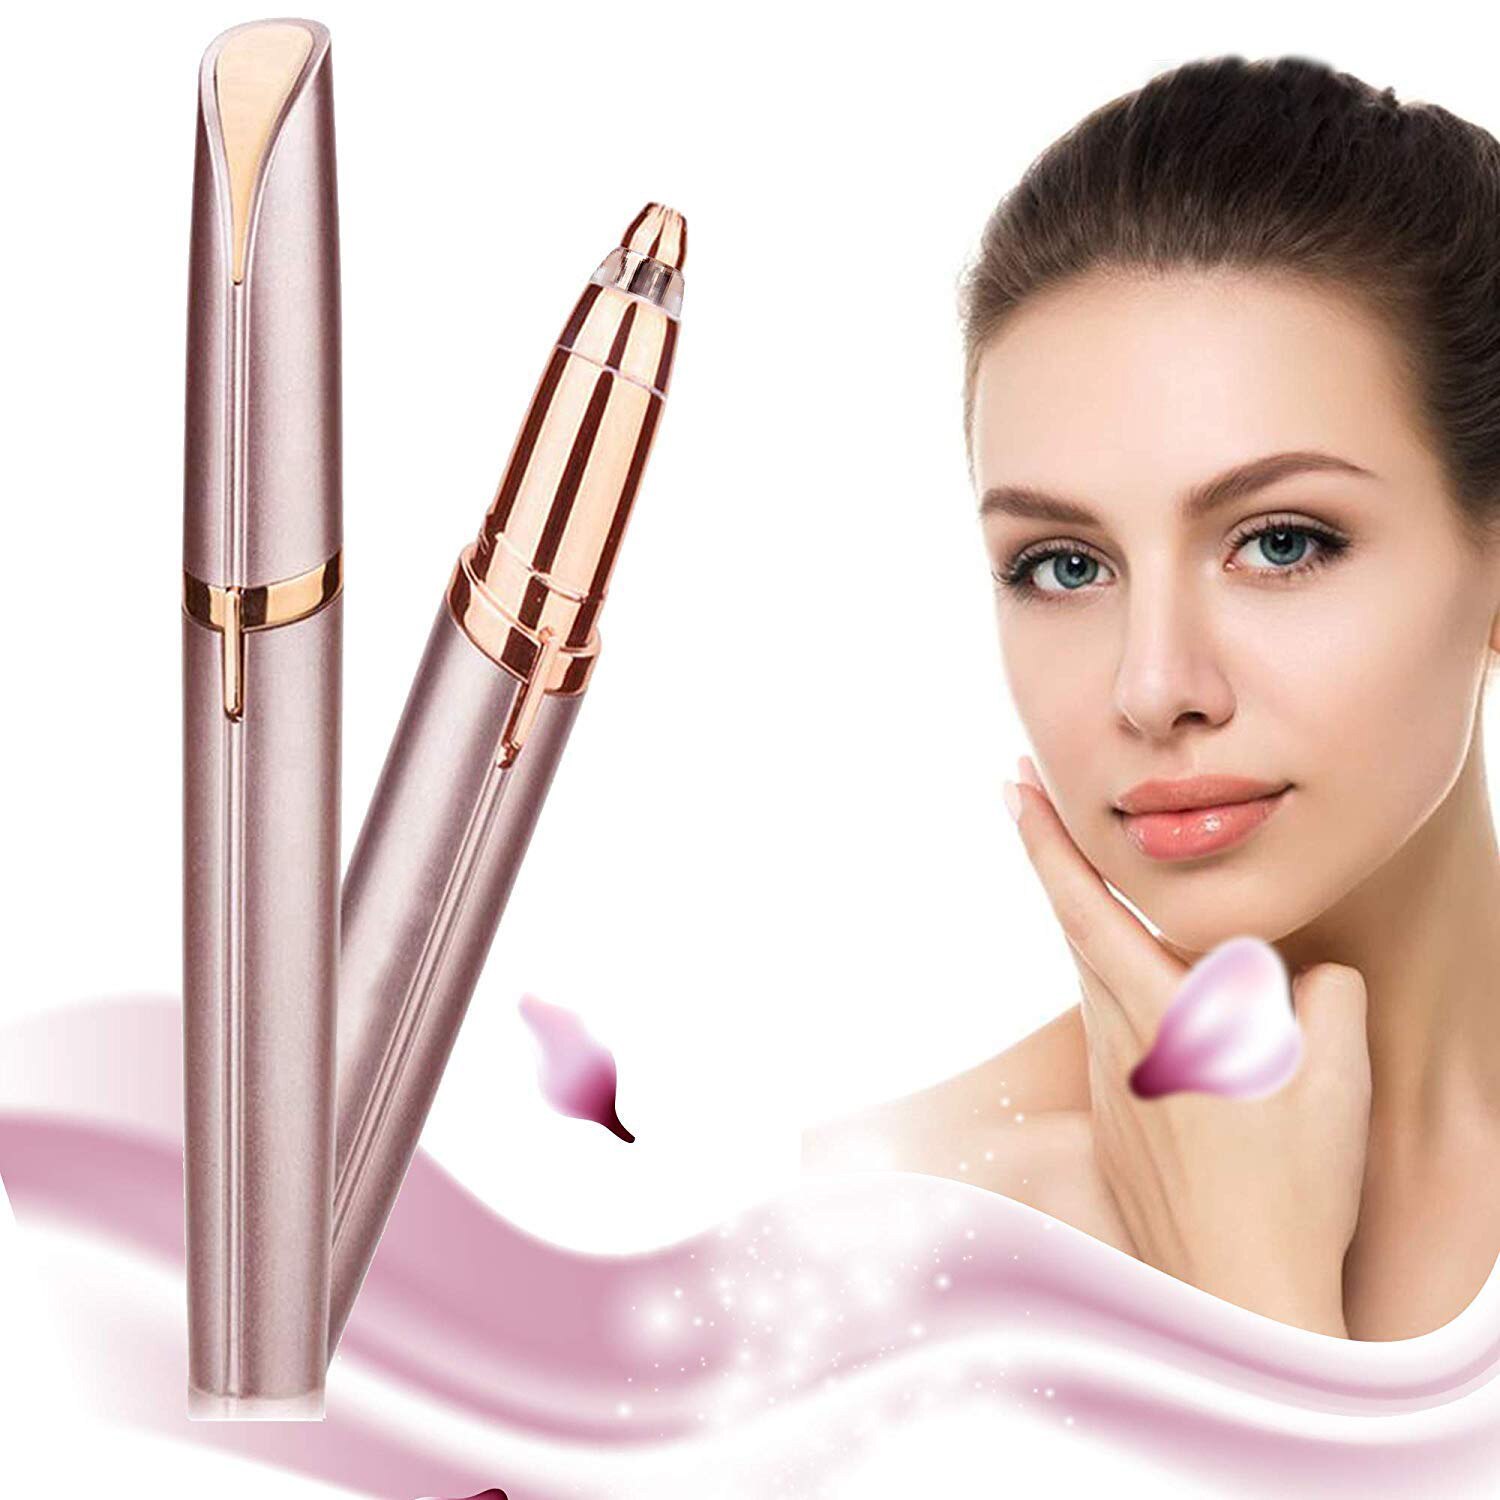 Buy Eyebrow Hair Remover Painless Precision Eyebrow Trimmer Eyebrow Razor  Tool For Face Lips Nose Facial Hair Removal for Men Women Online at Lowest  Price in Ubuy Angola. 408784087